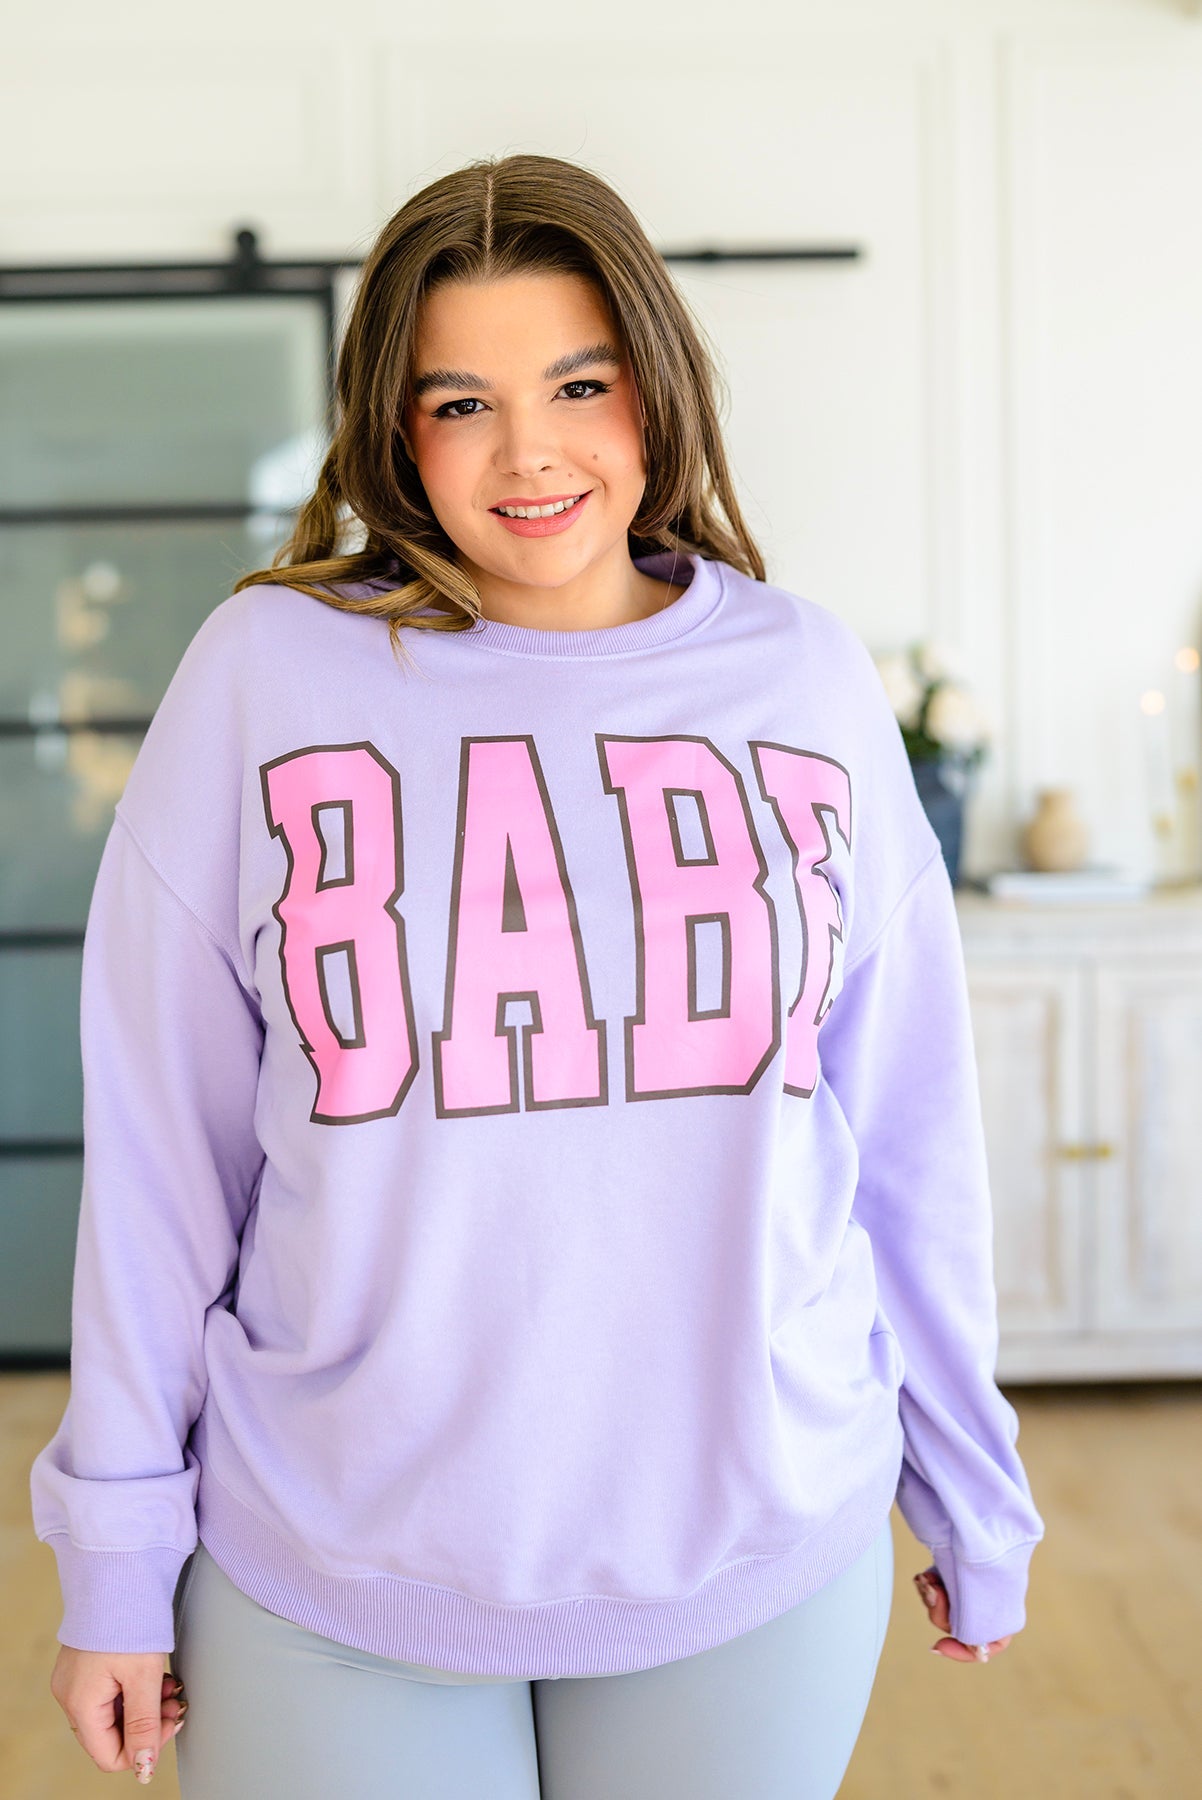 She's a Babe Sweater